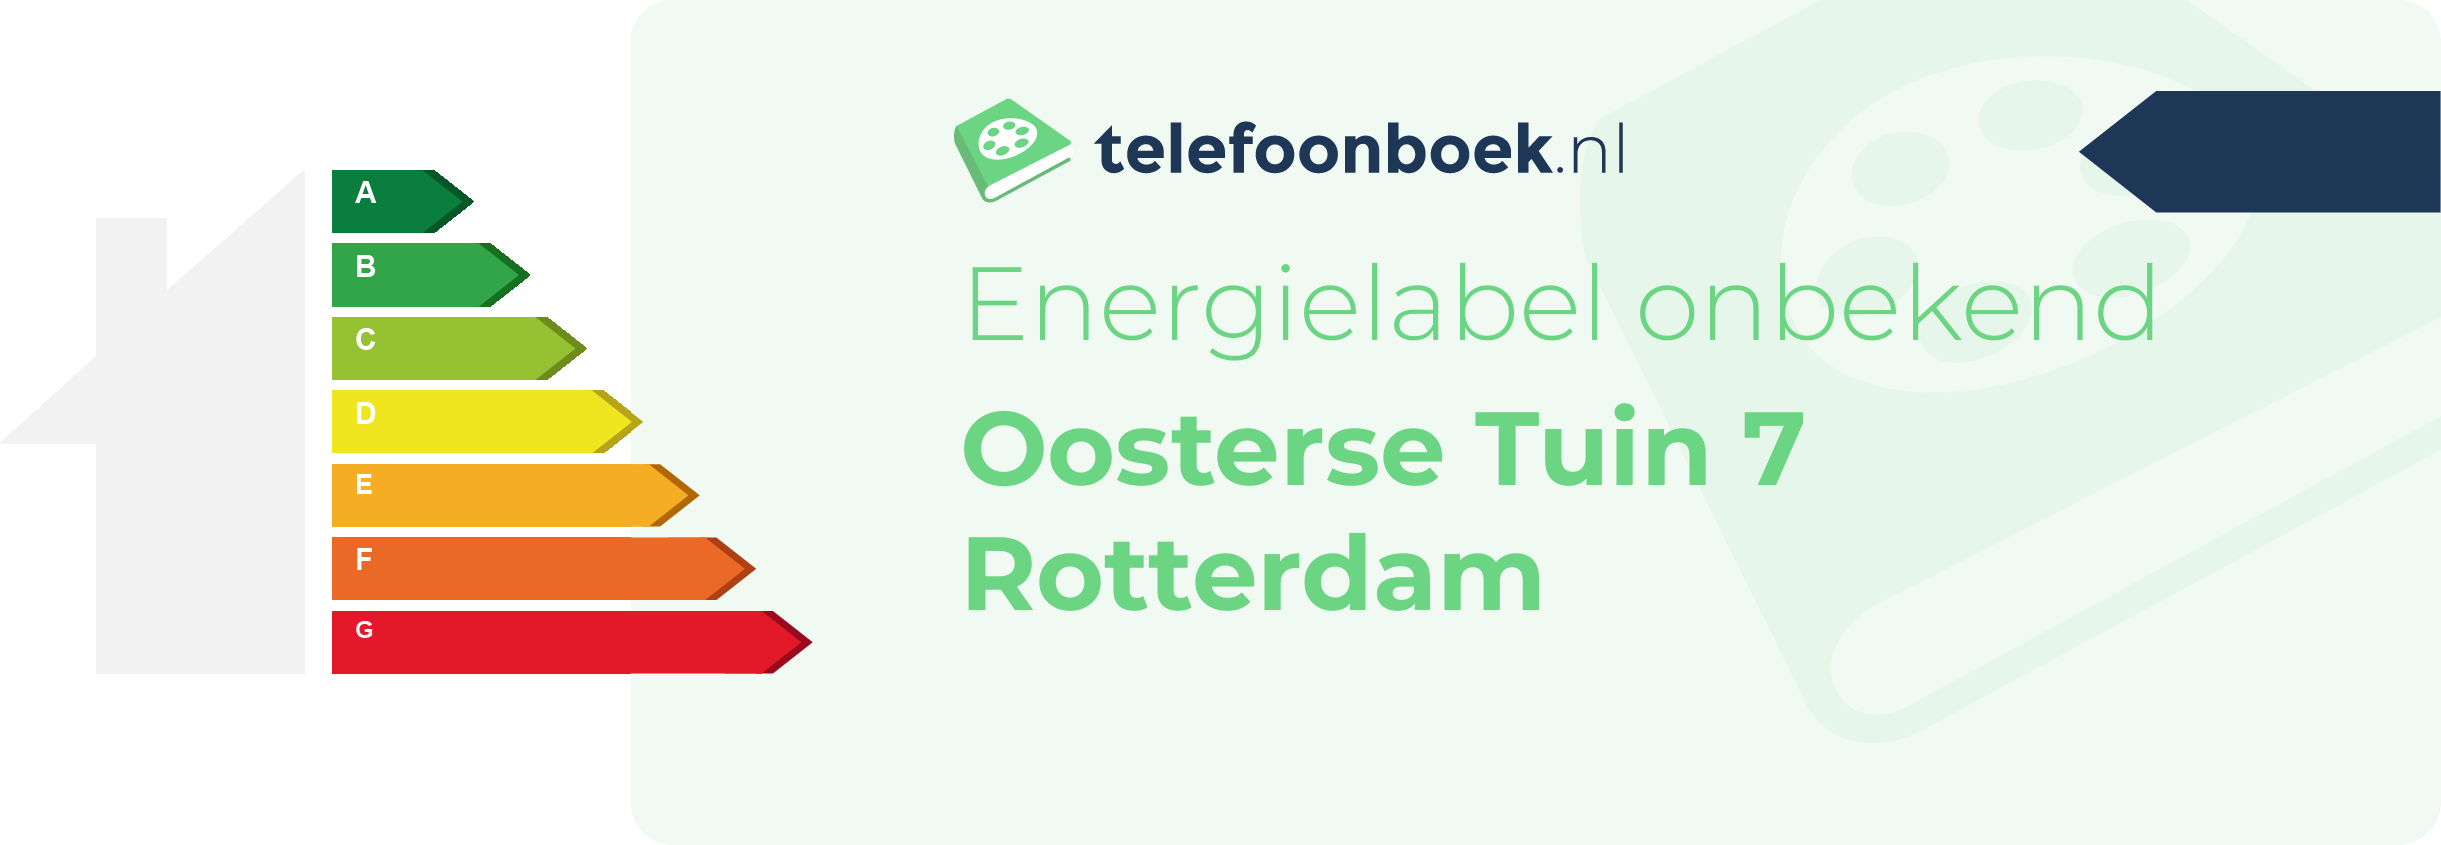 Energielabel Oosterse Tuin 7 Rotterdam